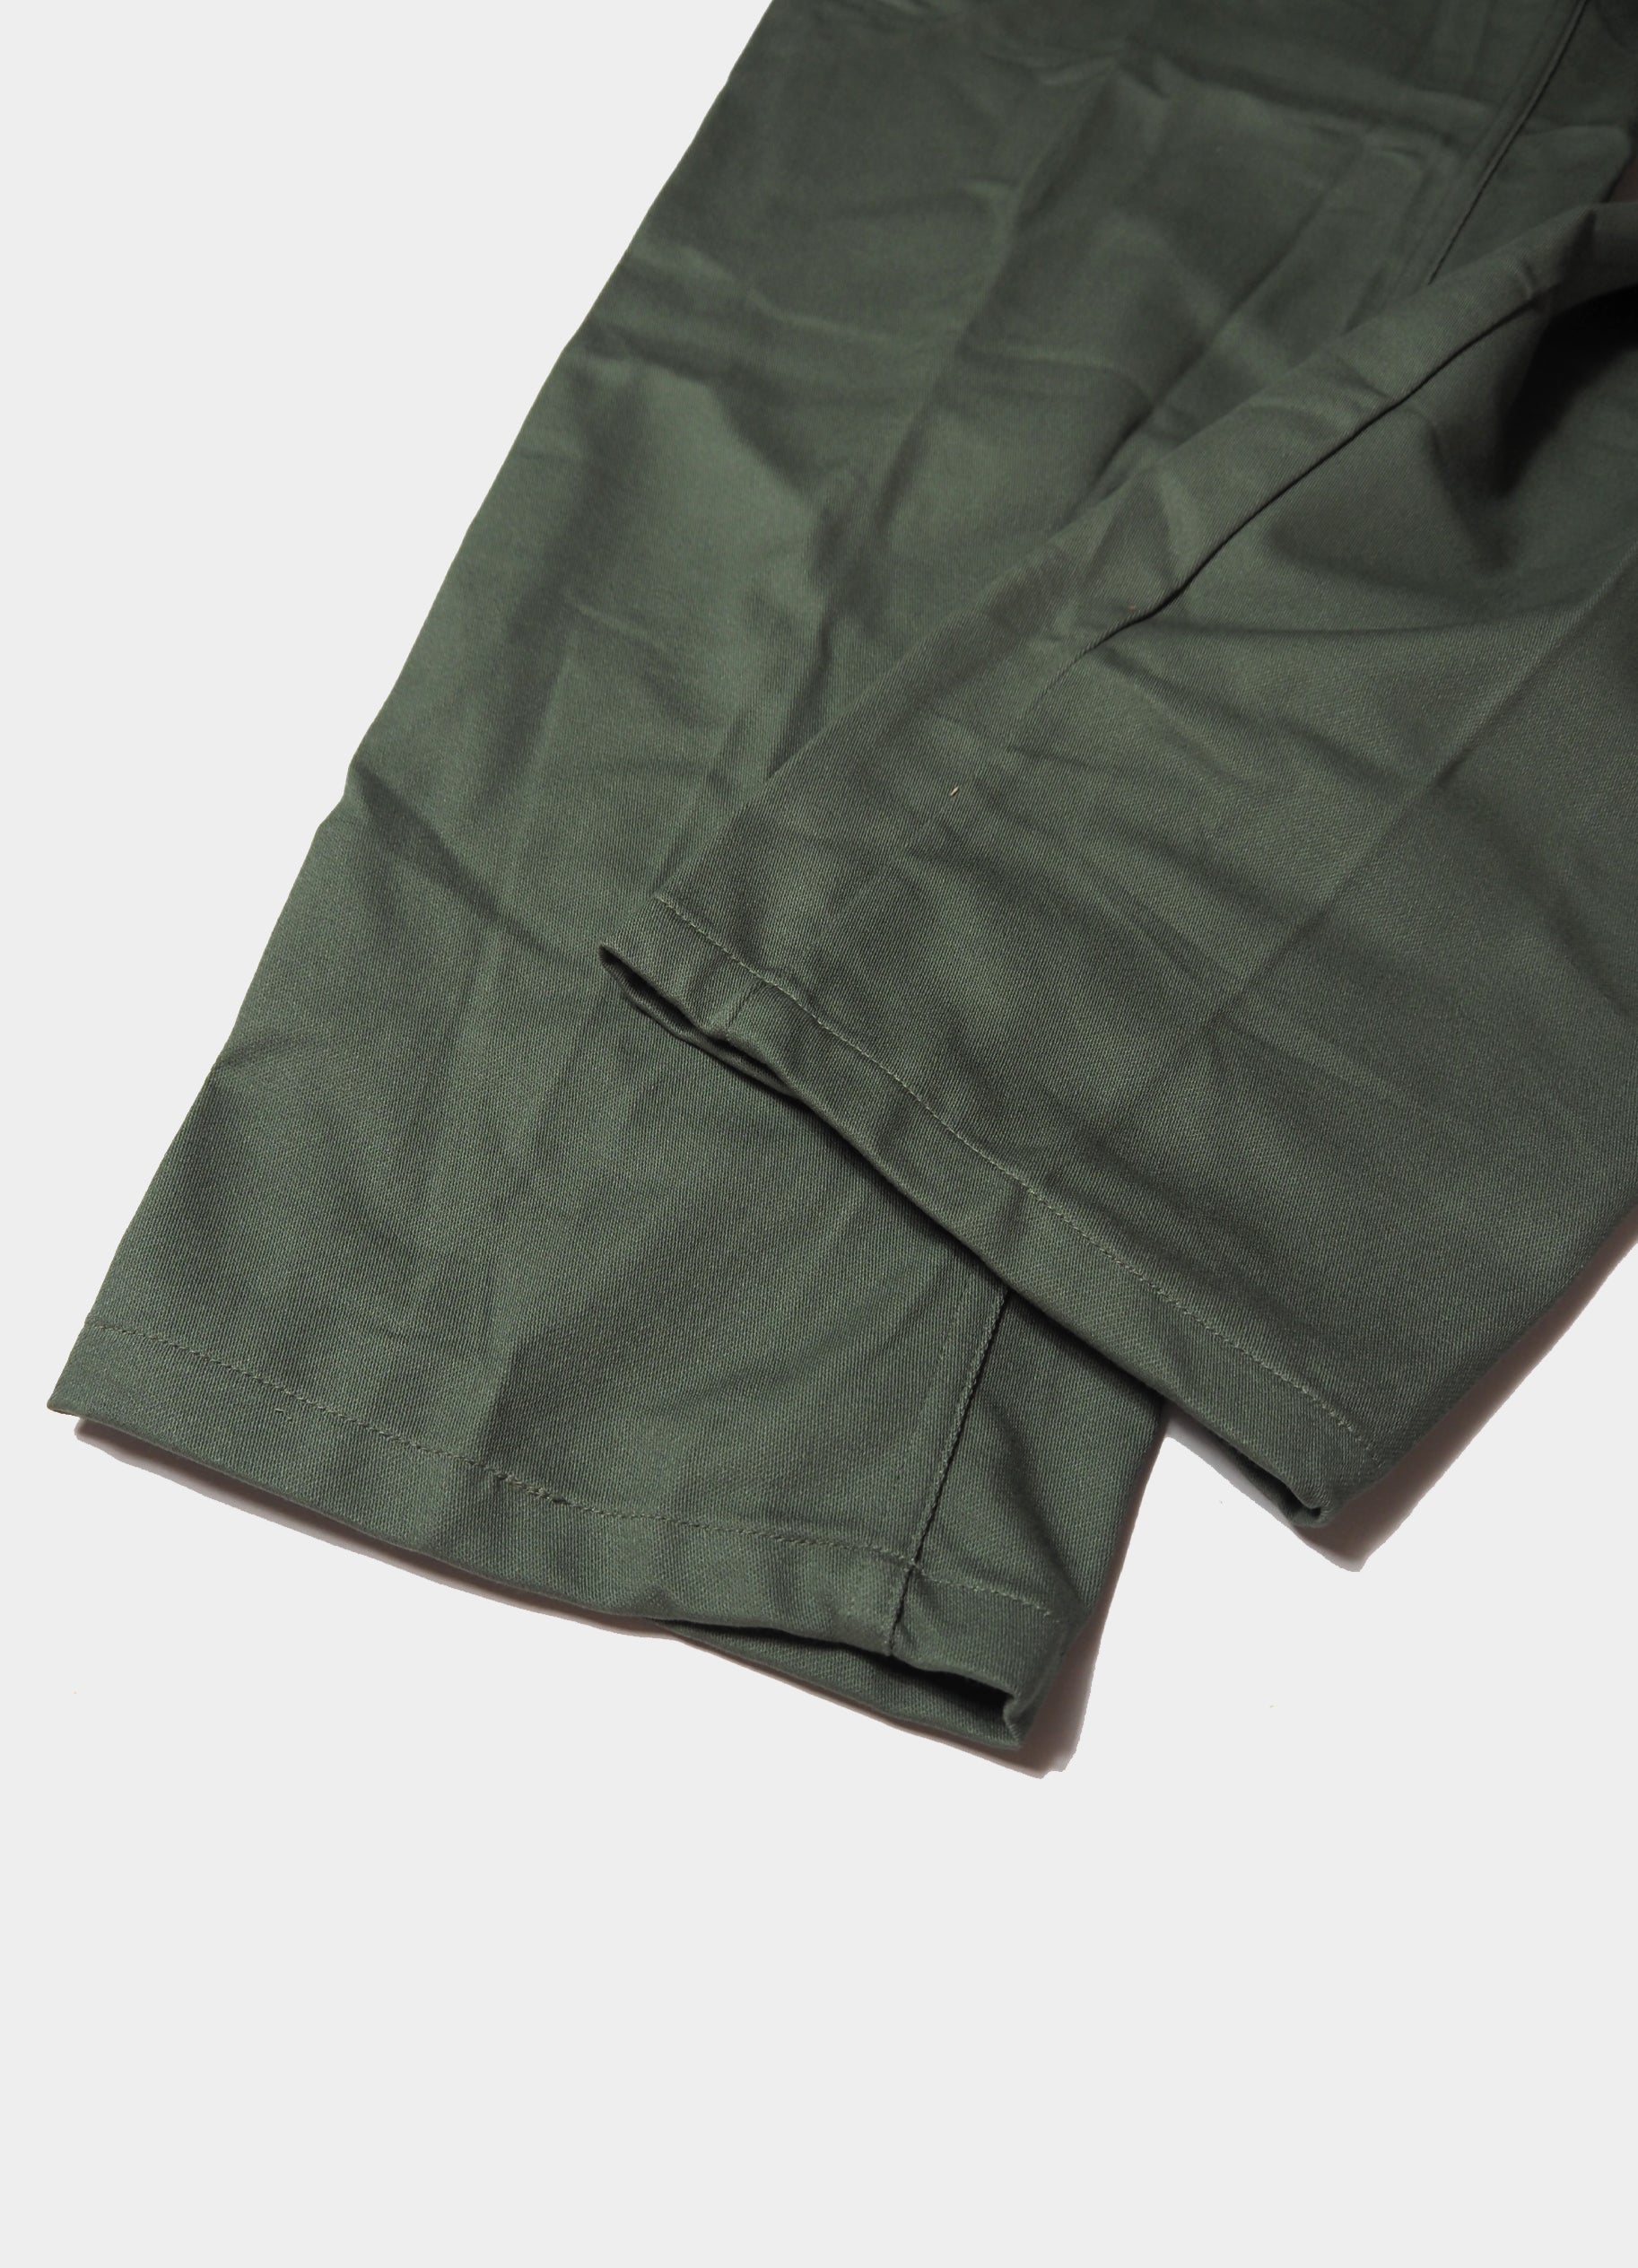 DEADSTOCK(デッドストック) / Cotton back Sateen Fatigue Pants by 